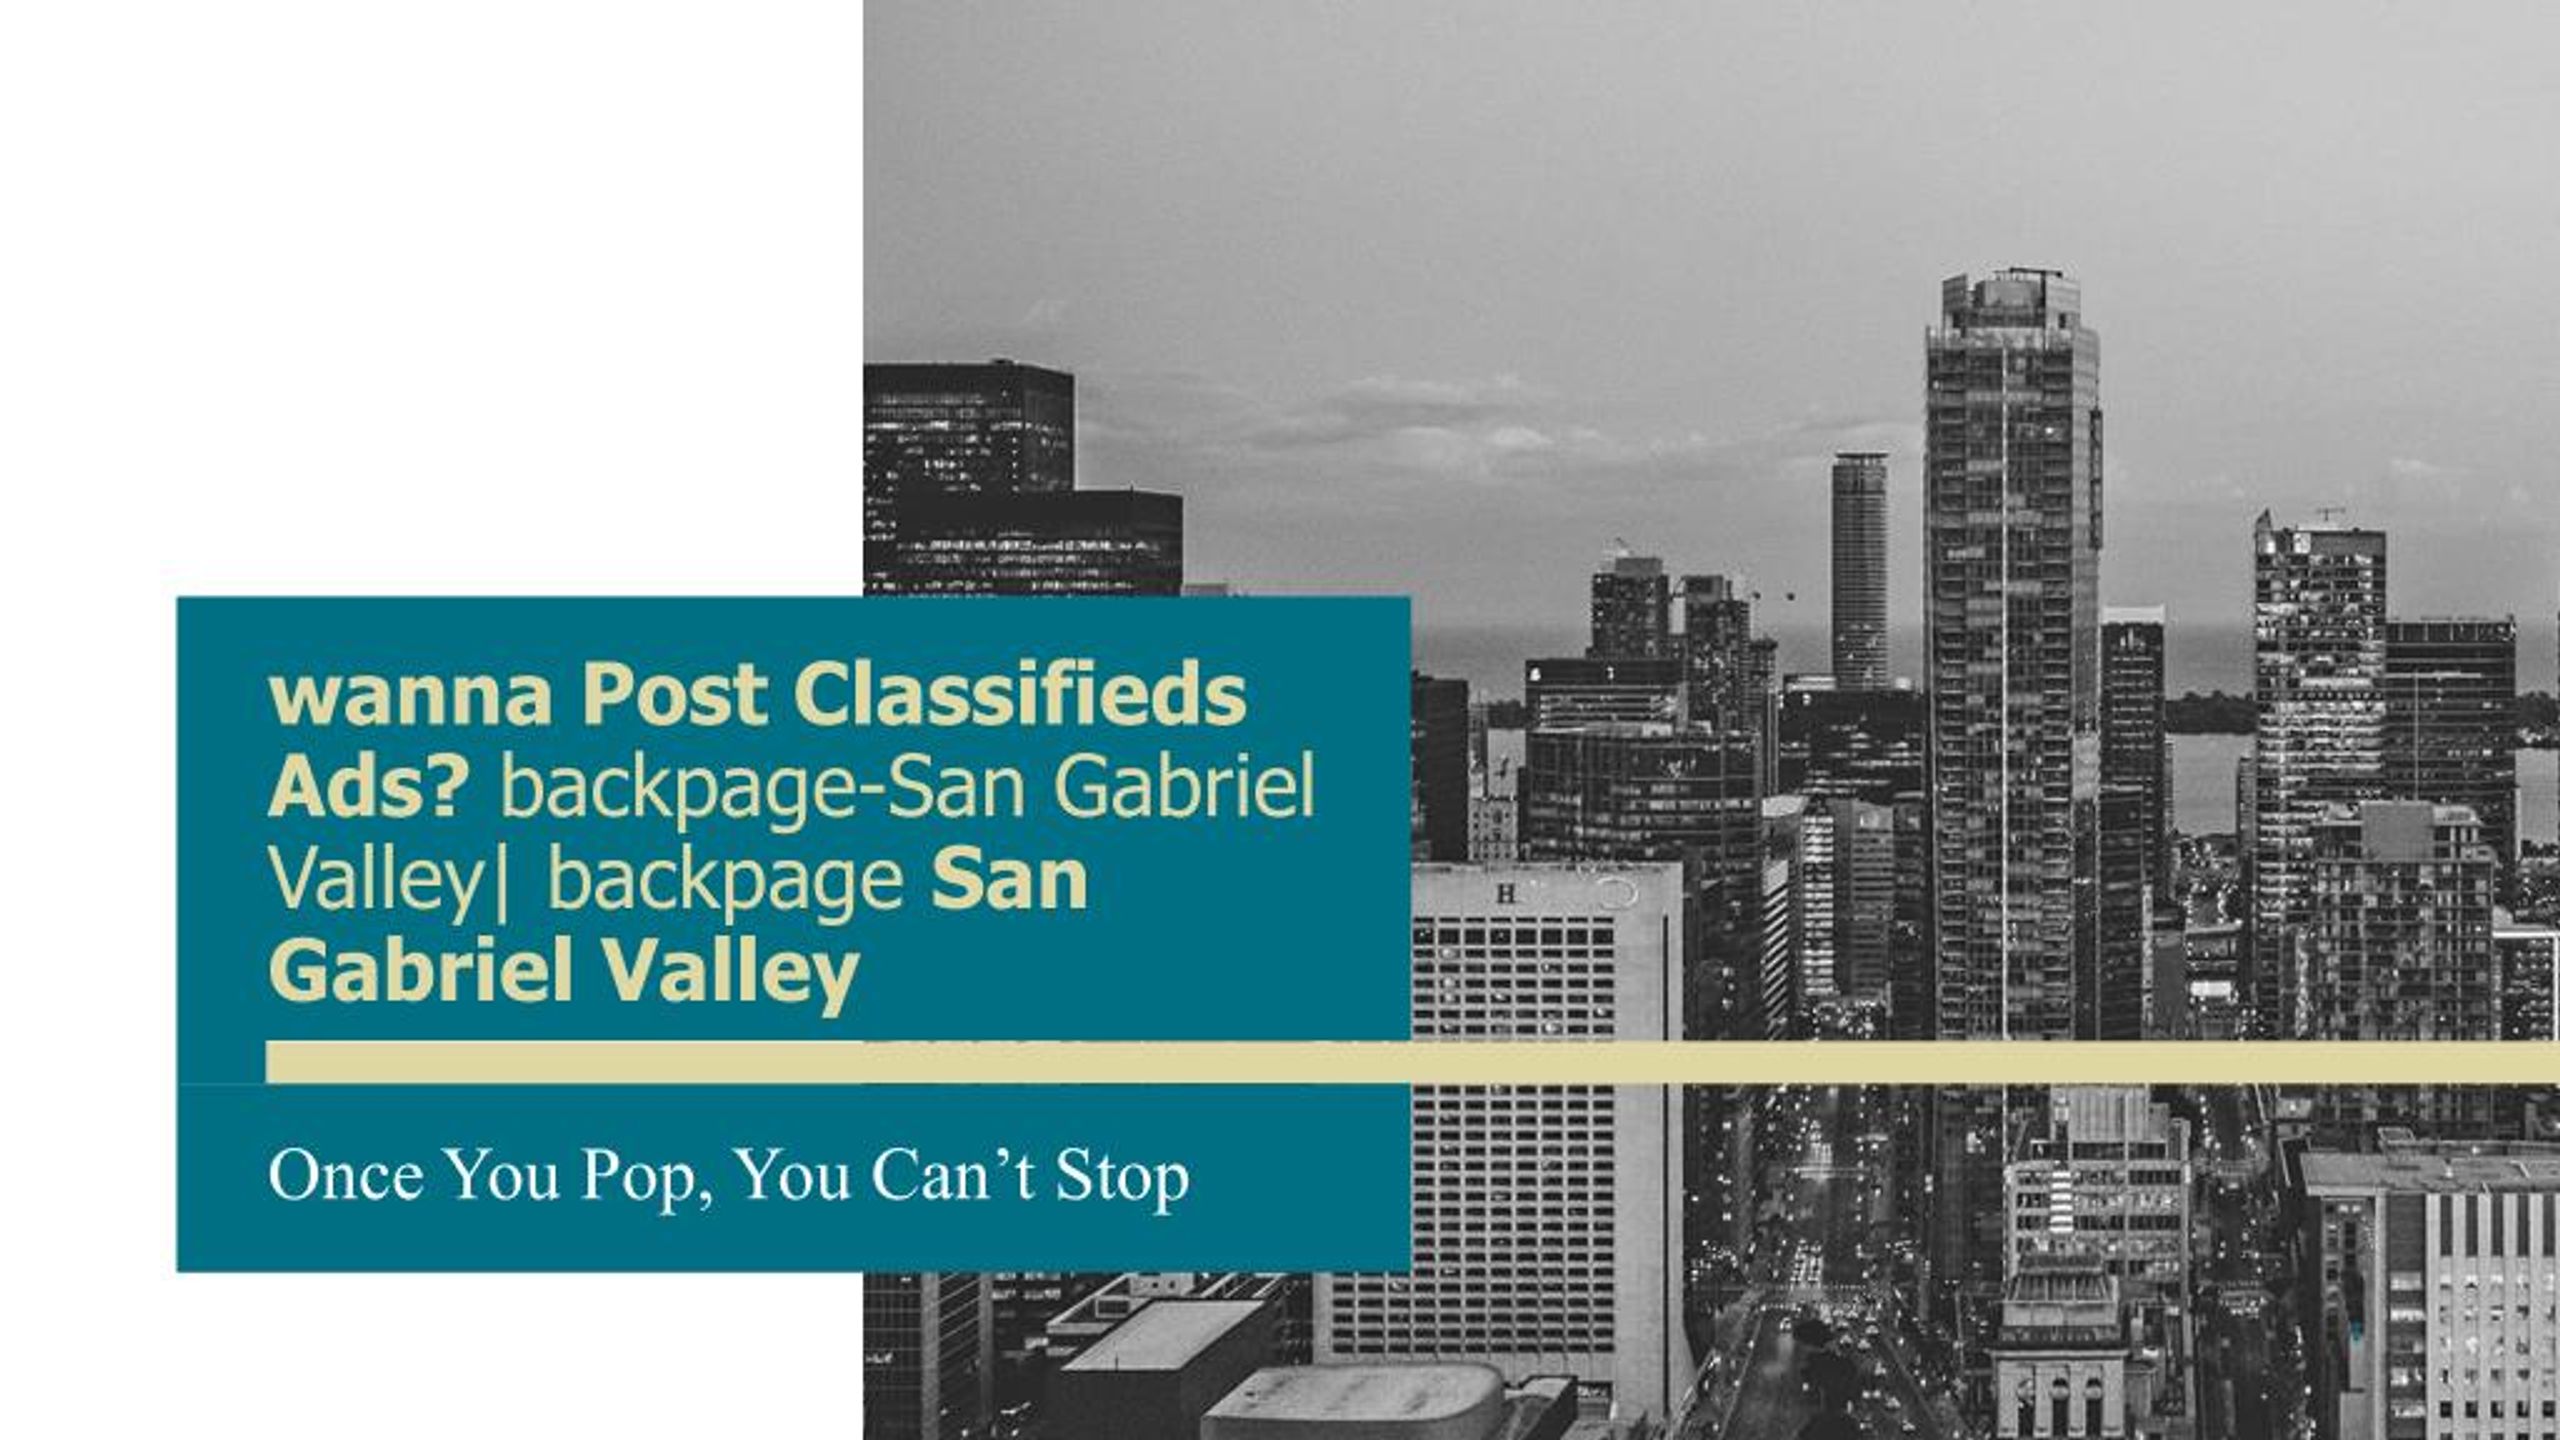 wanna Post Classifieds Ads?backpage-San Gabriel Valley.